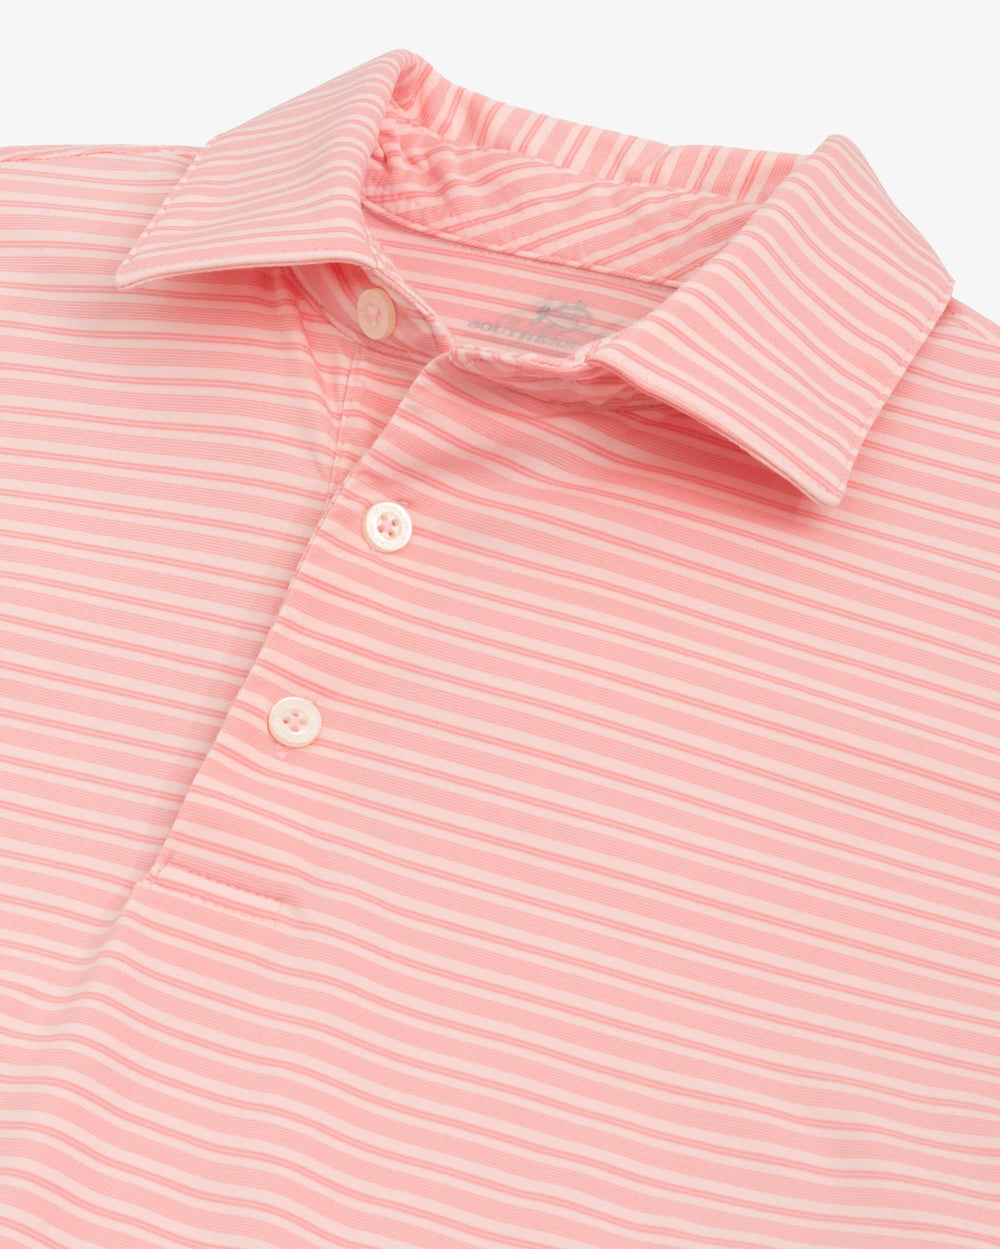 The detail view of the Southern Tide brrr°®-eeze Bowen Stripe Performance Polo Shirt by Southern Tide - Rose Blush